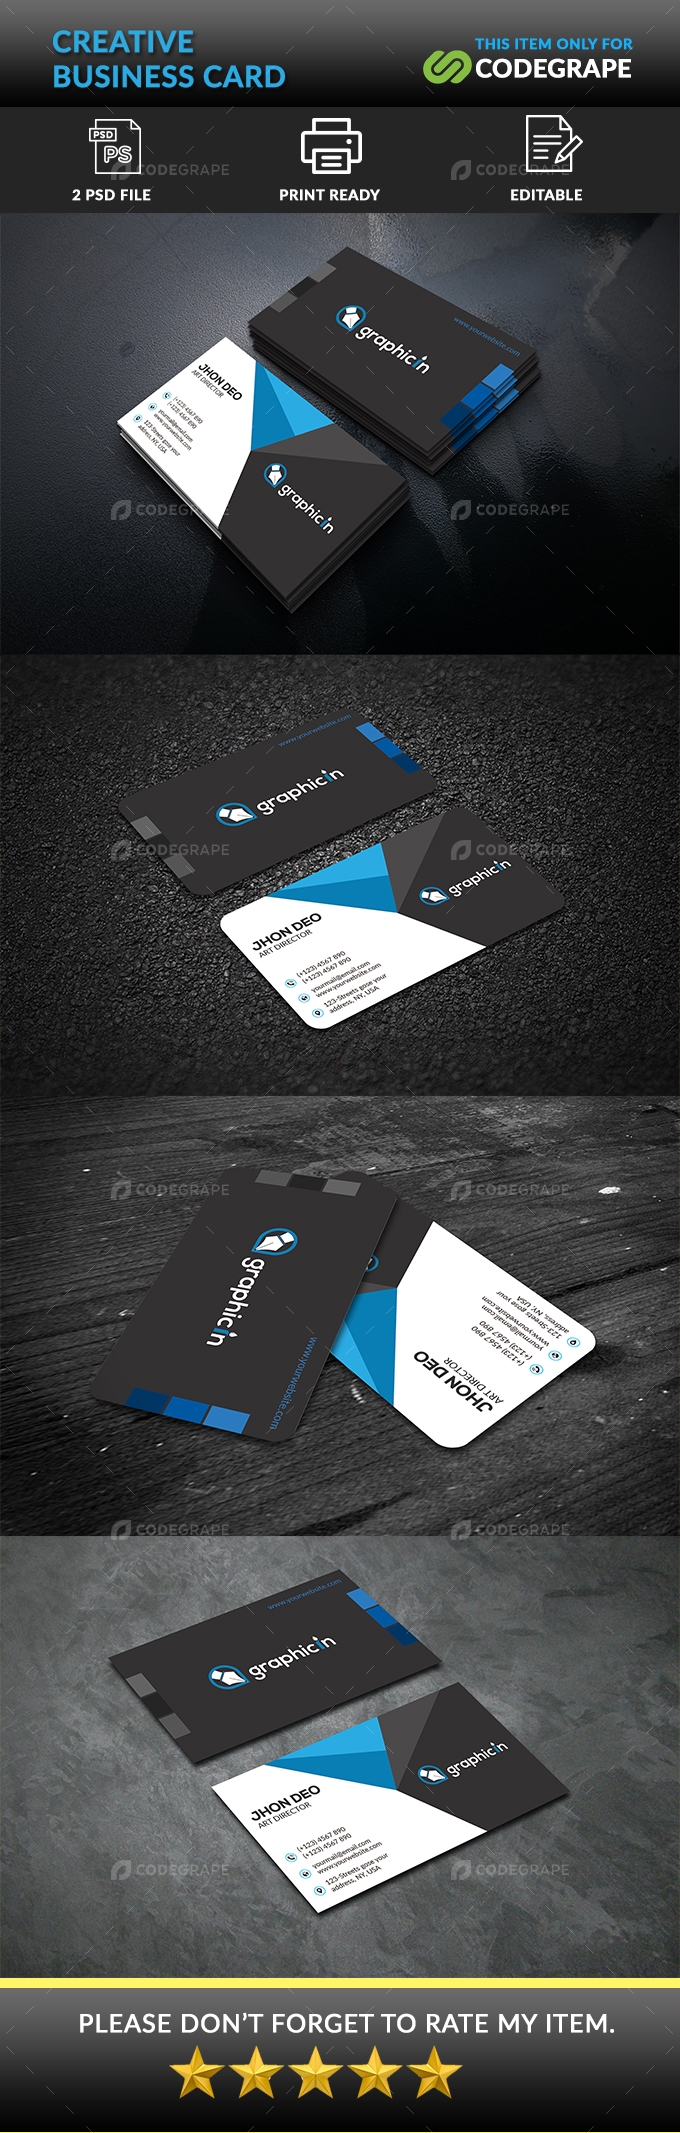 Creative Business cards